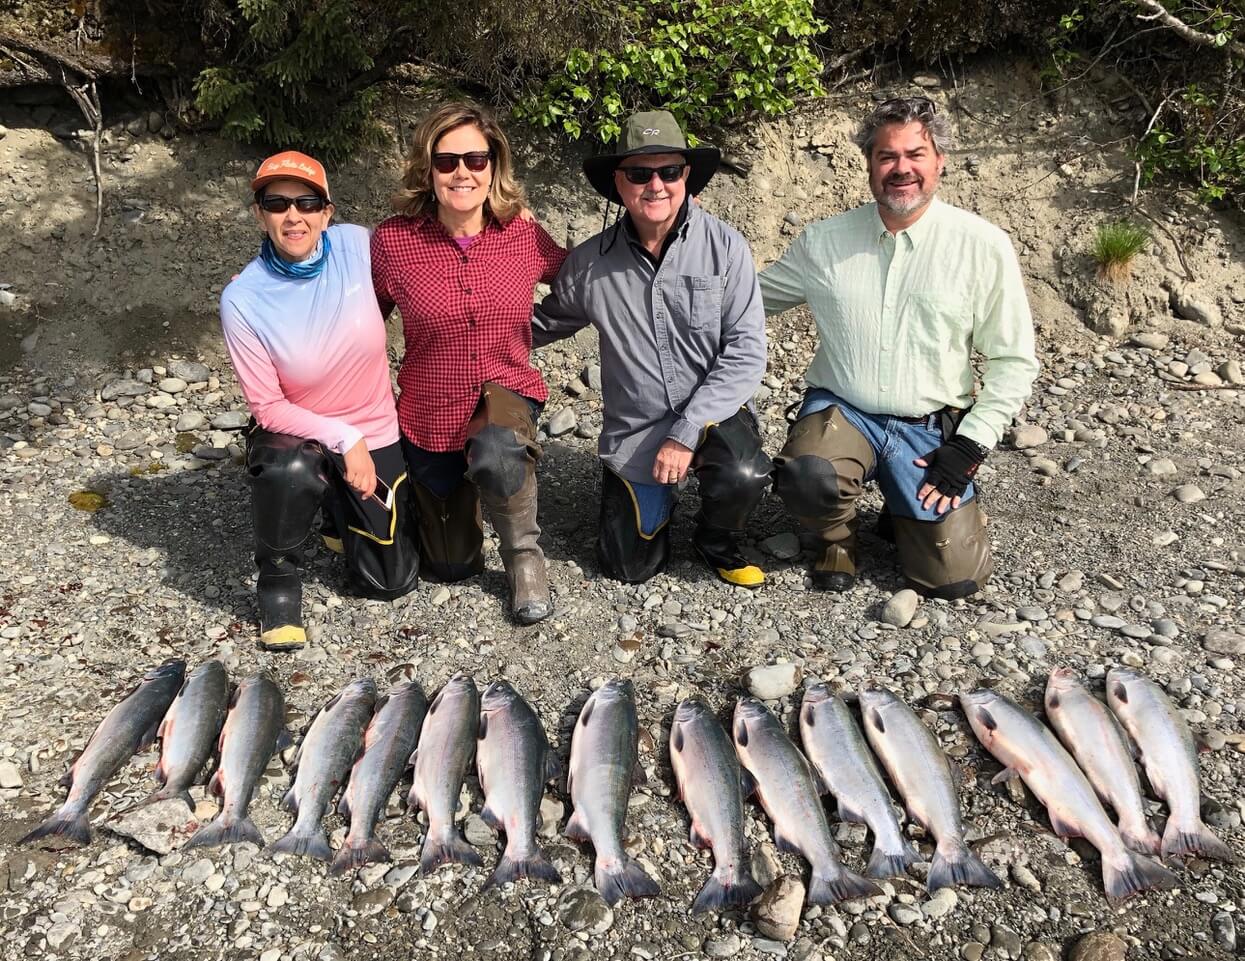 Four anglers posing on the shore in front of a line of caught king salmon.